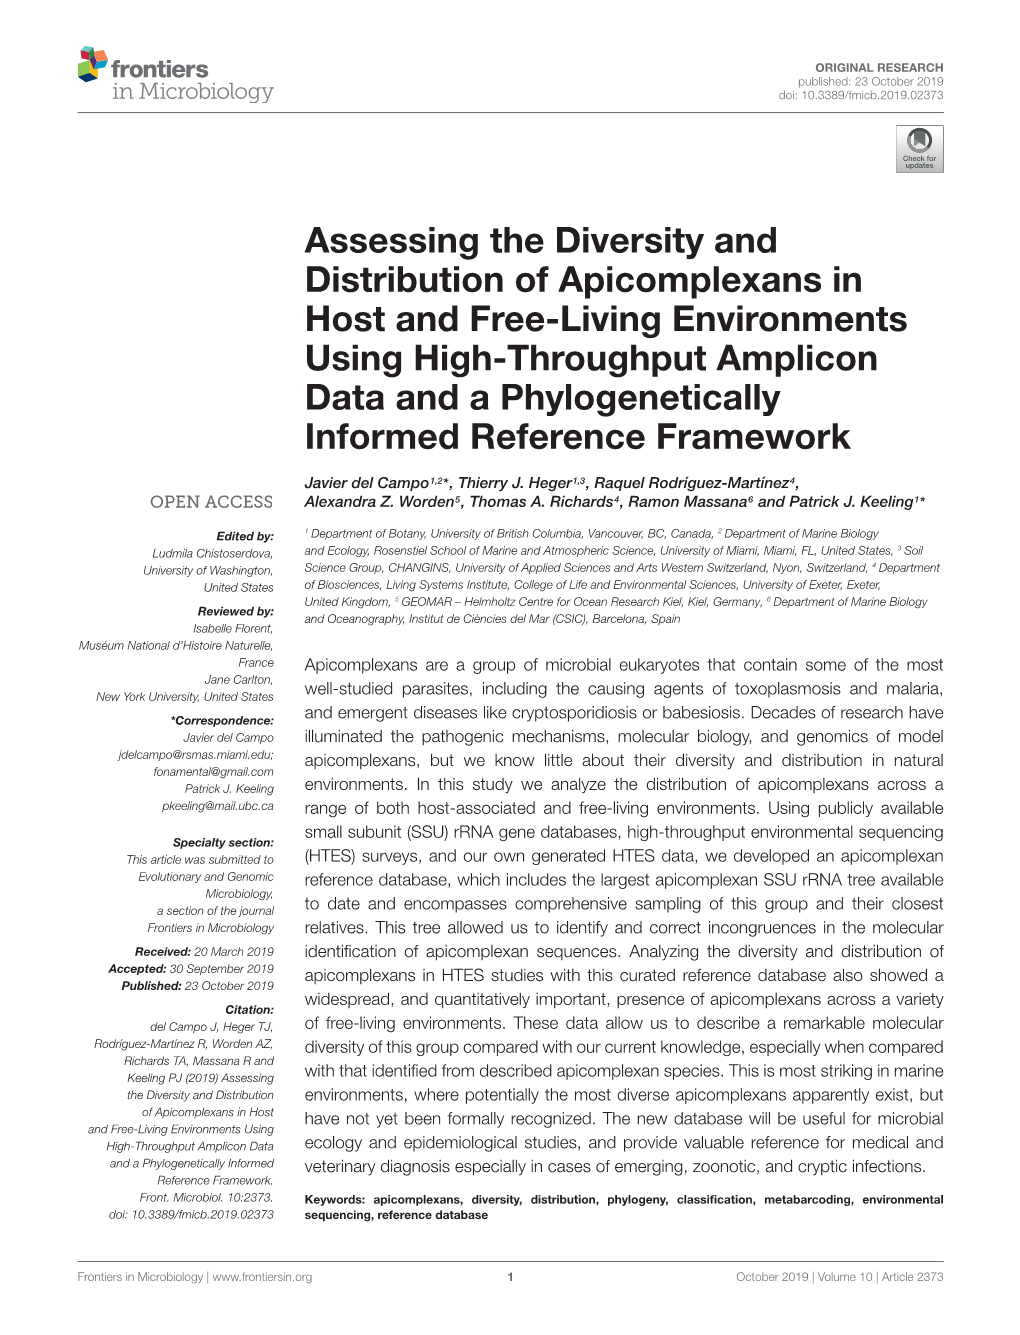 Assessing the Diversity and Distribution of Apicomplexans In